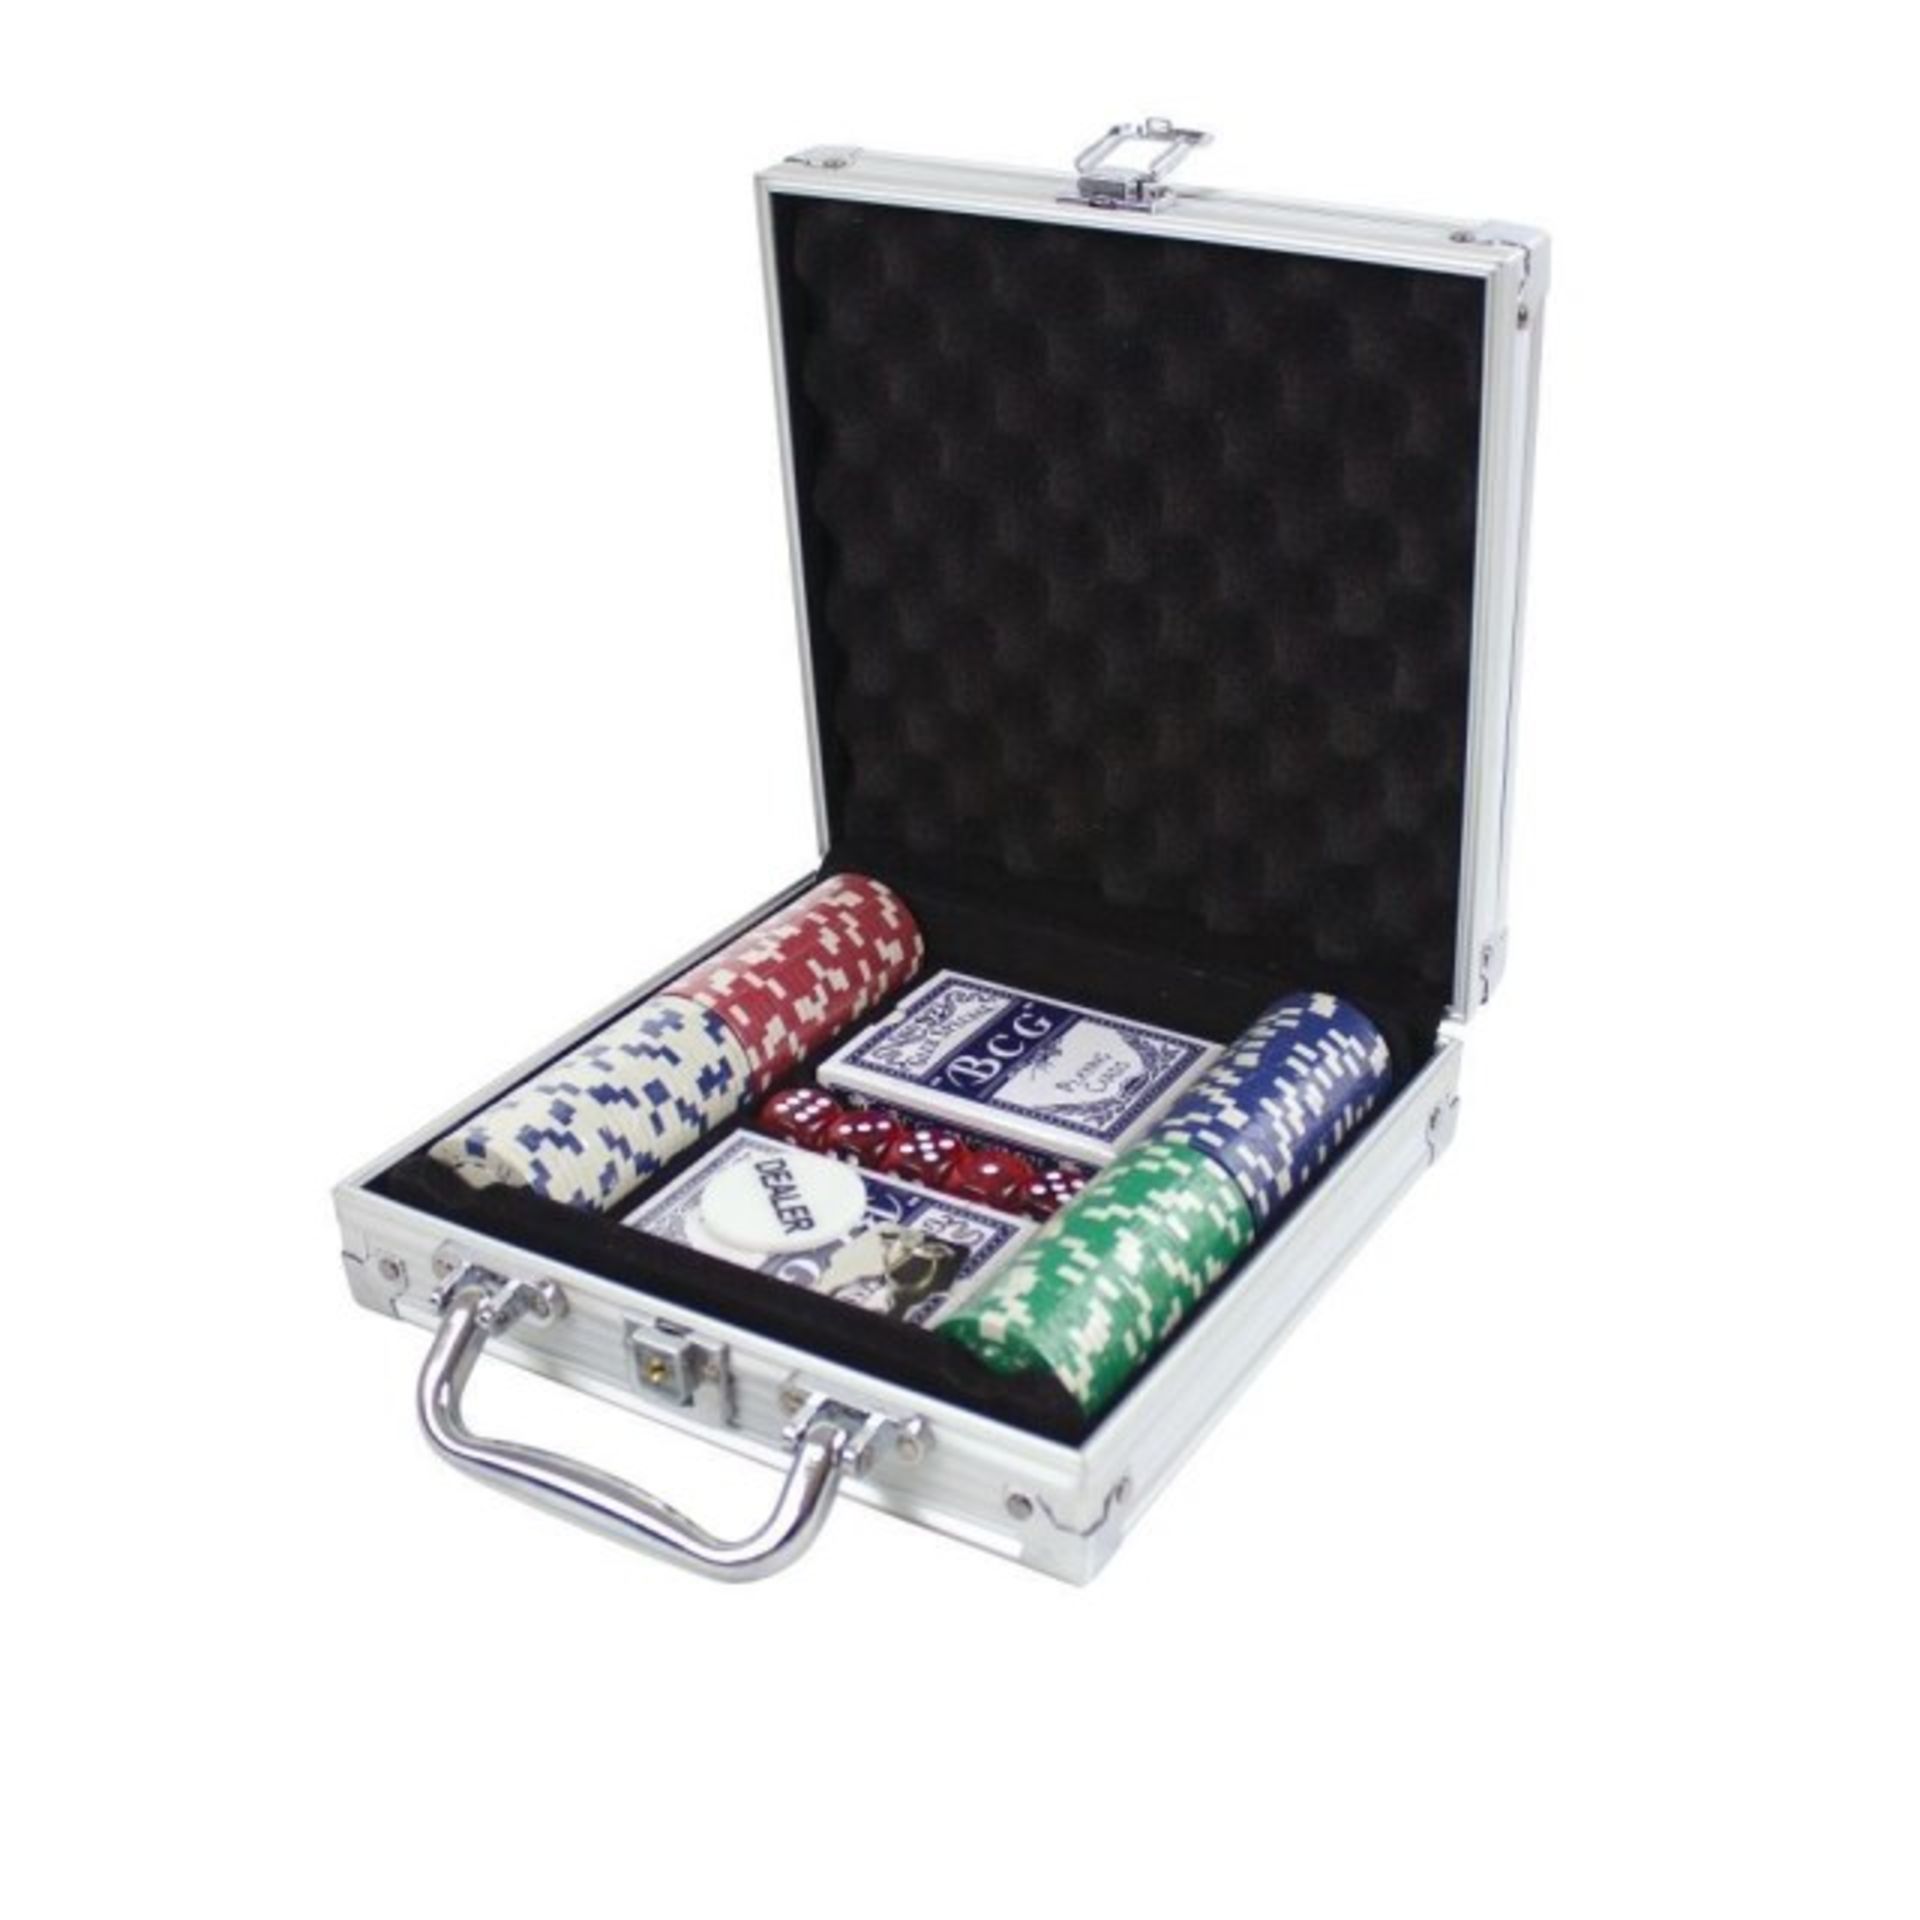 V *TRADE QTY* Brand New 100 Piece Casino Style Poker Set In Carry Case X 3 YOUR BID PRICE TO BE